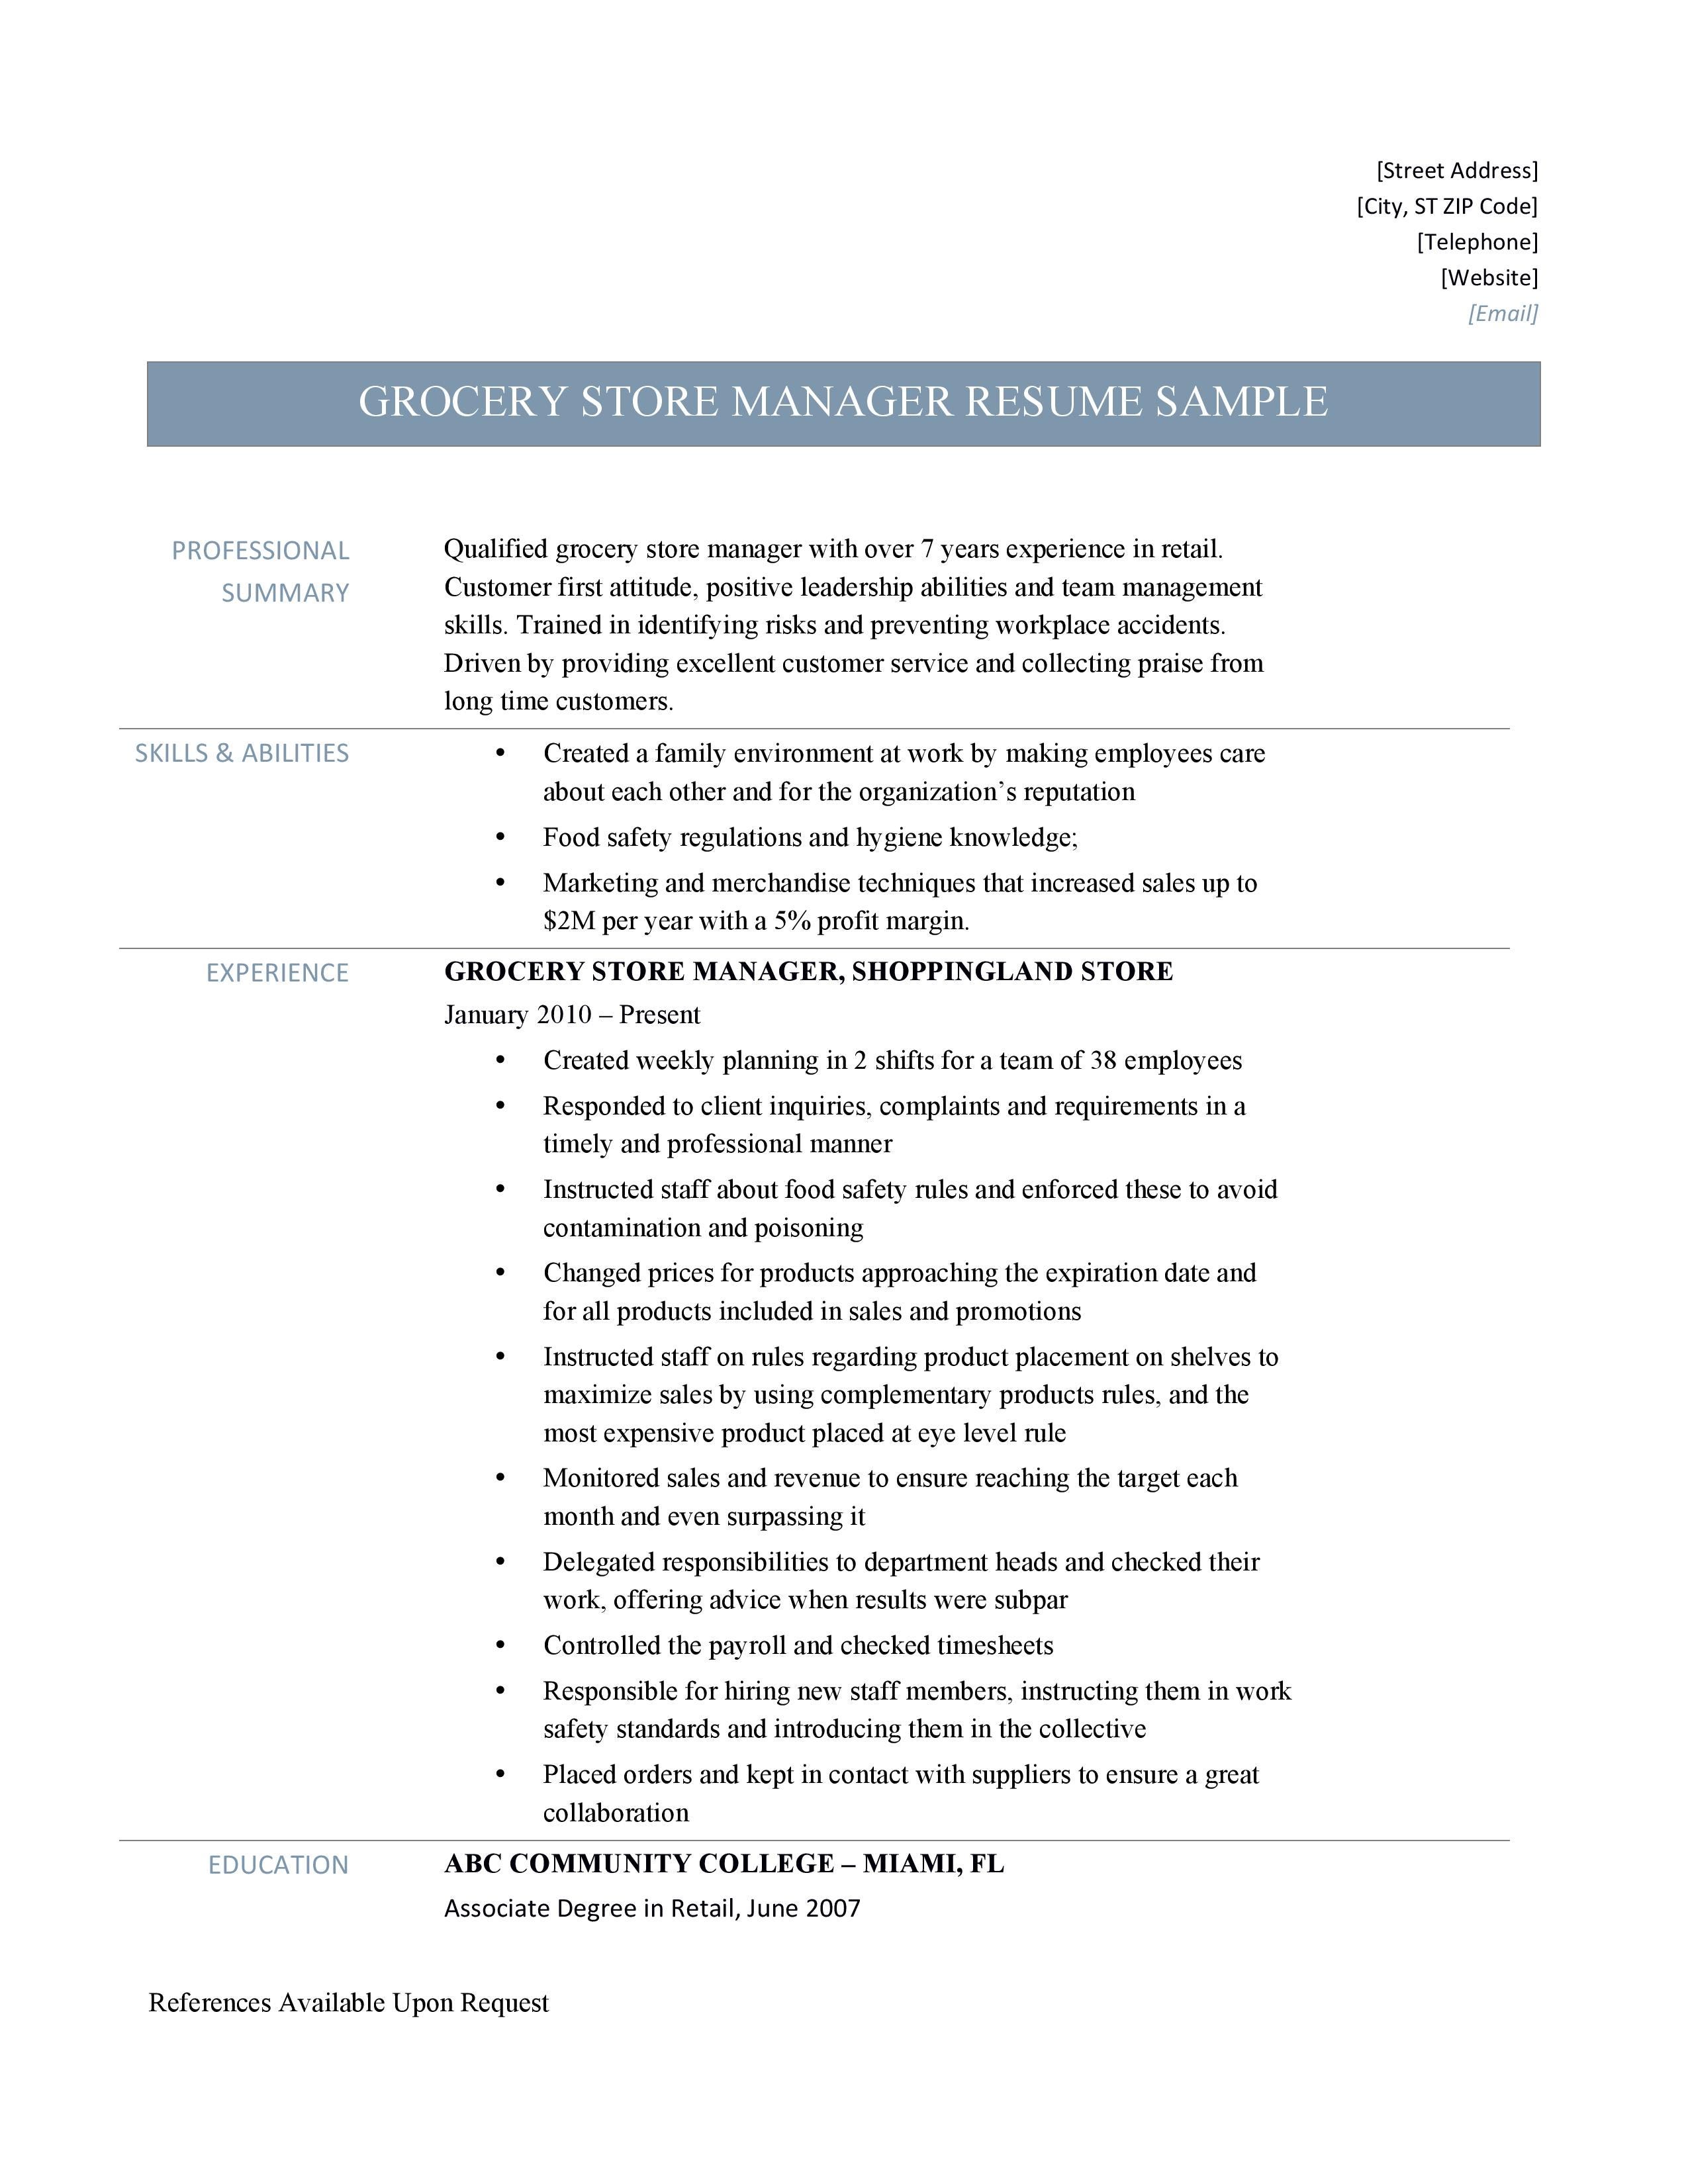 View Sample Grocery Store Resume Pics - sample shop design